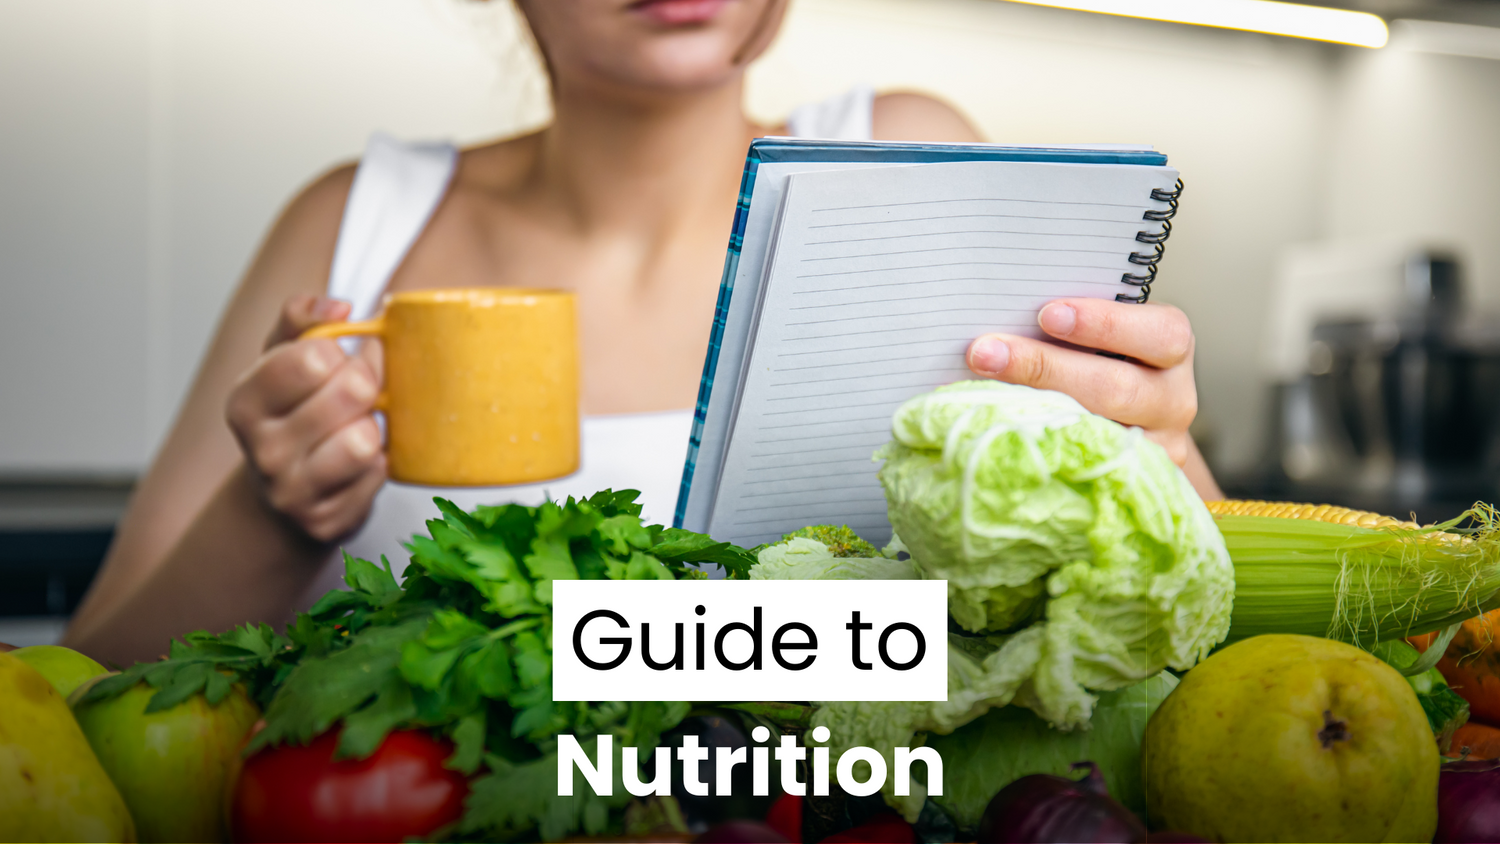 Your guide to understanding Nutrition